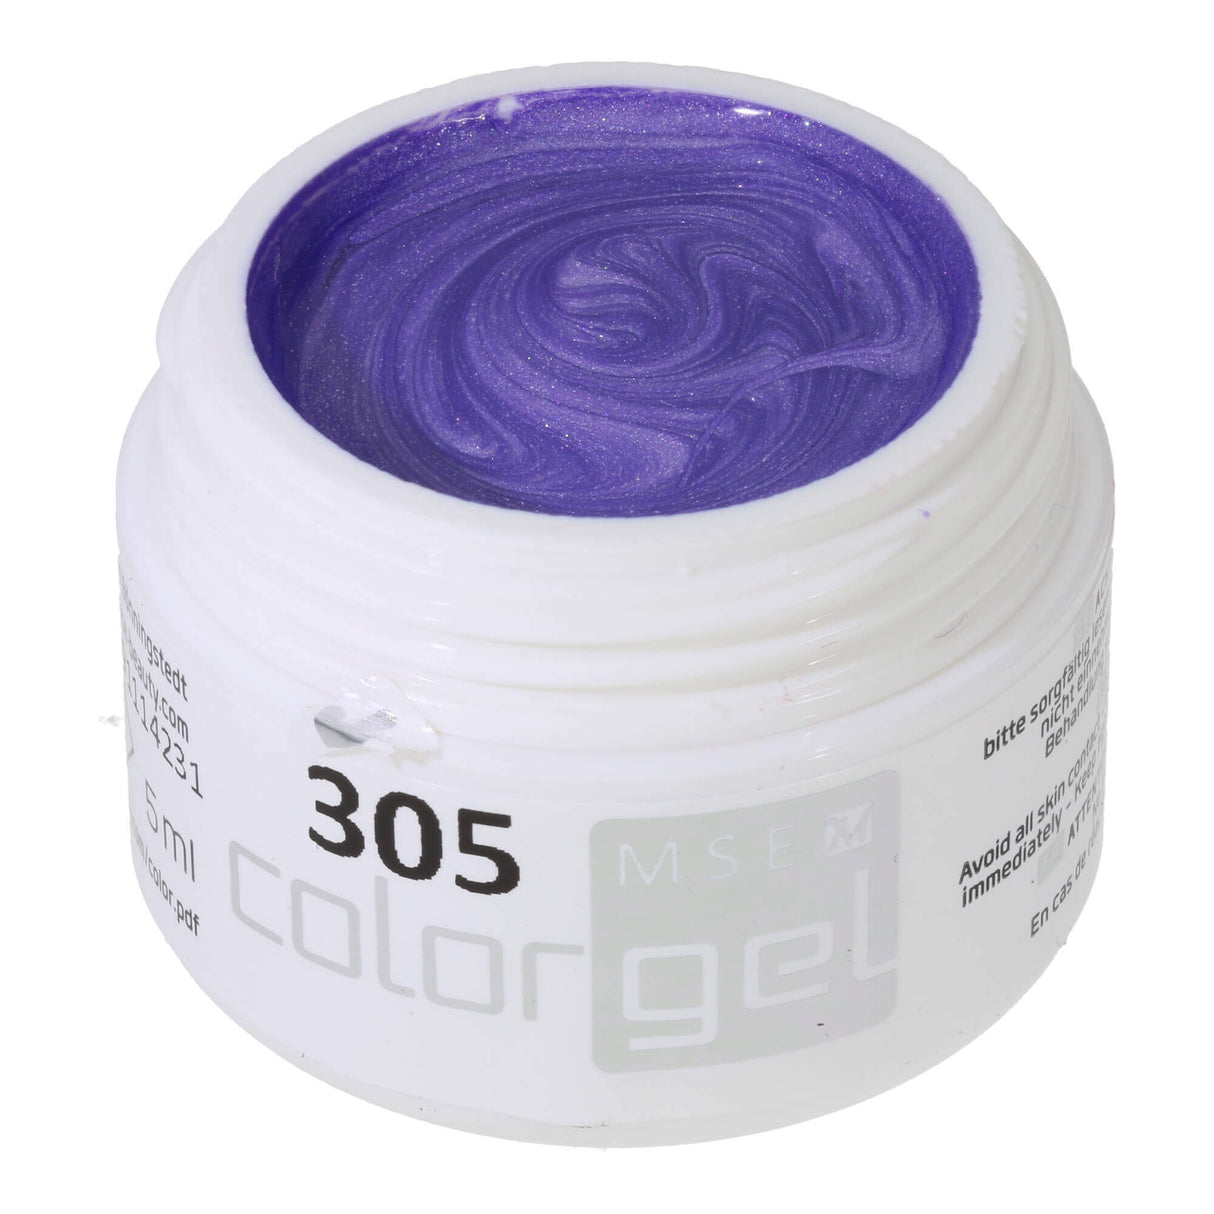 # 305 Premium EFFECT Color Gel 5ml Bluish lilac tone with blue-silver effect